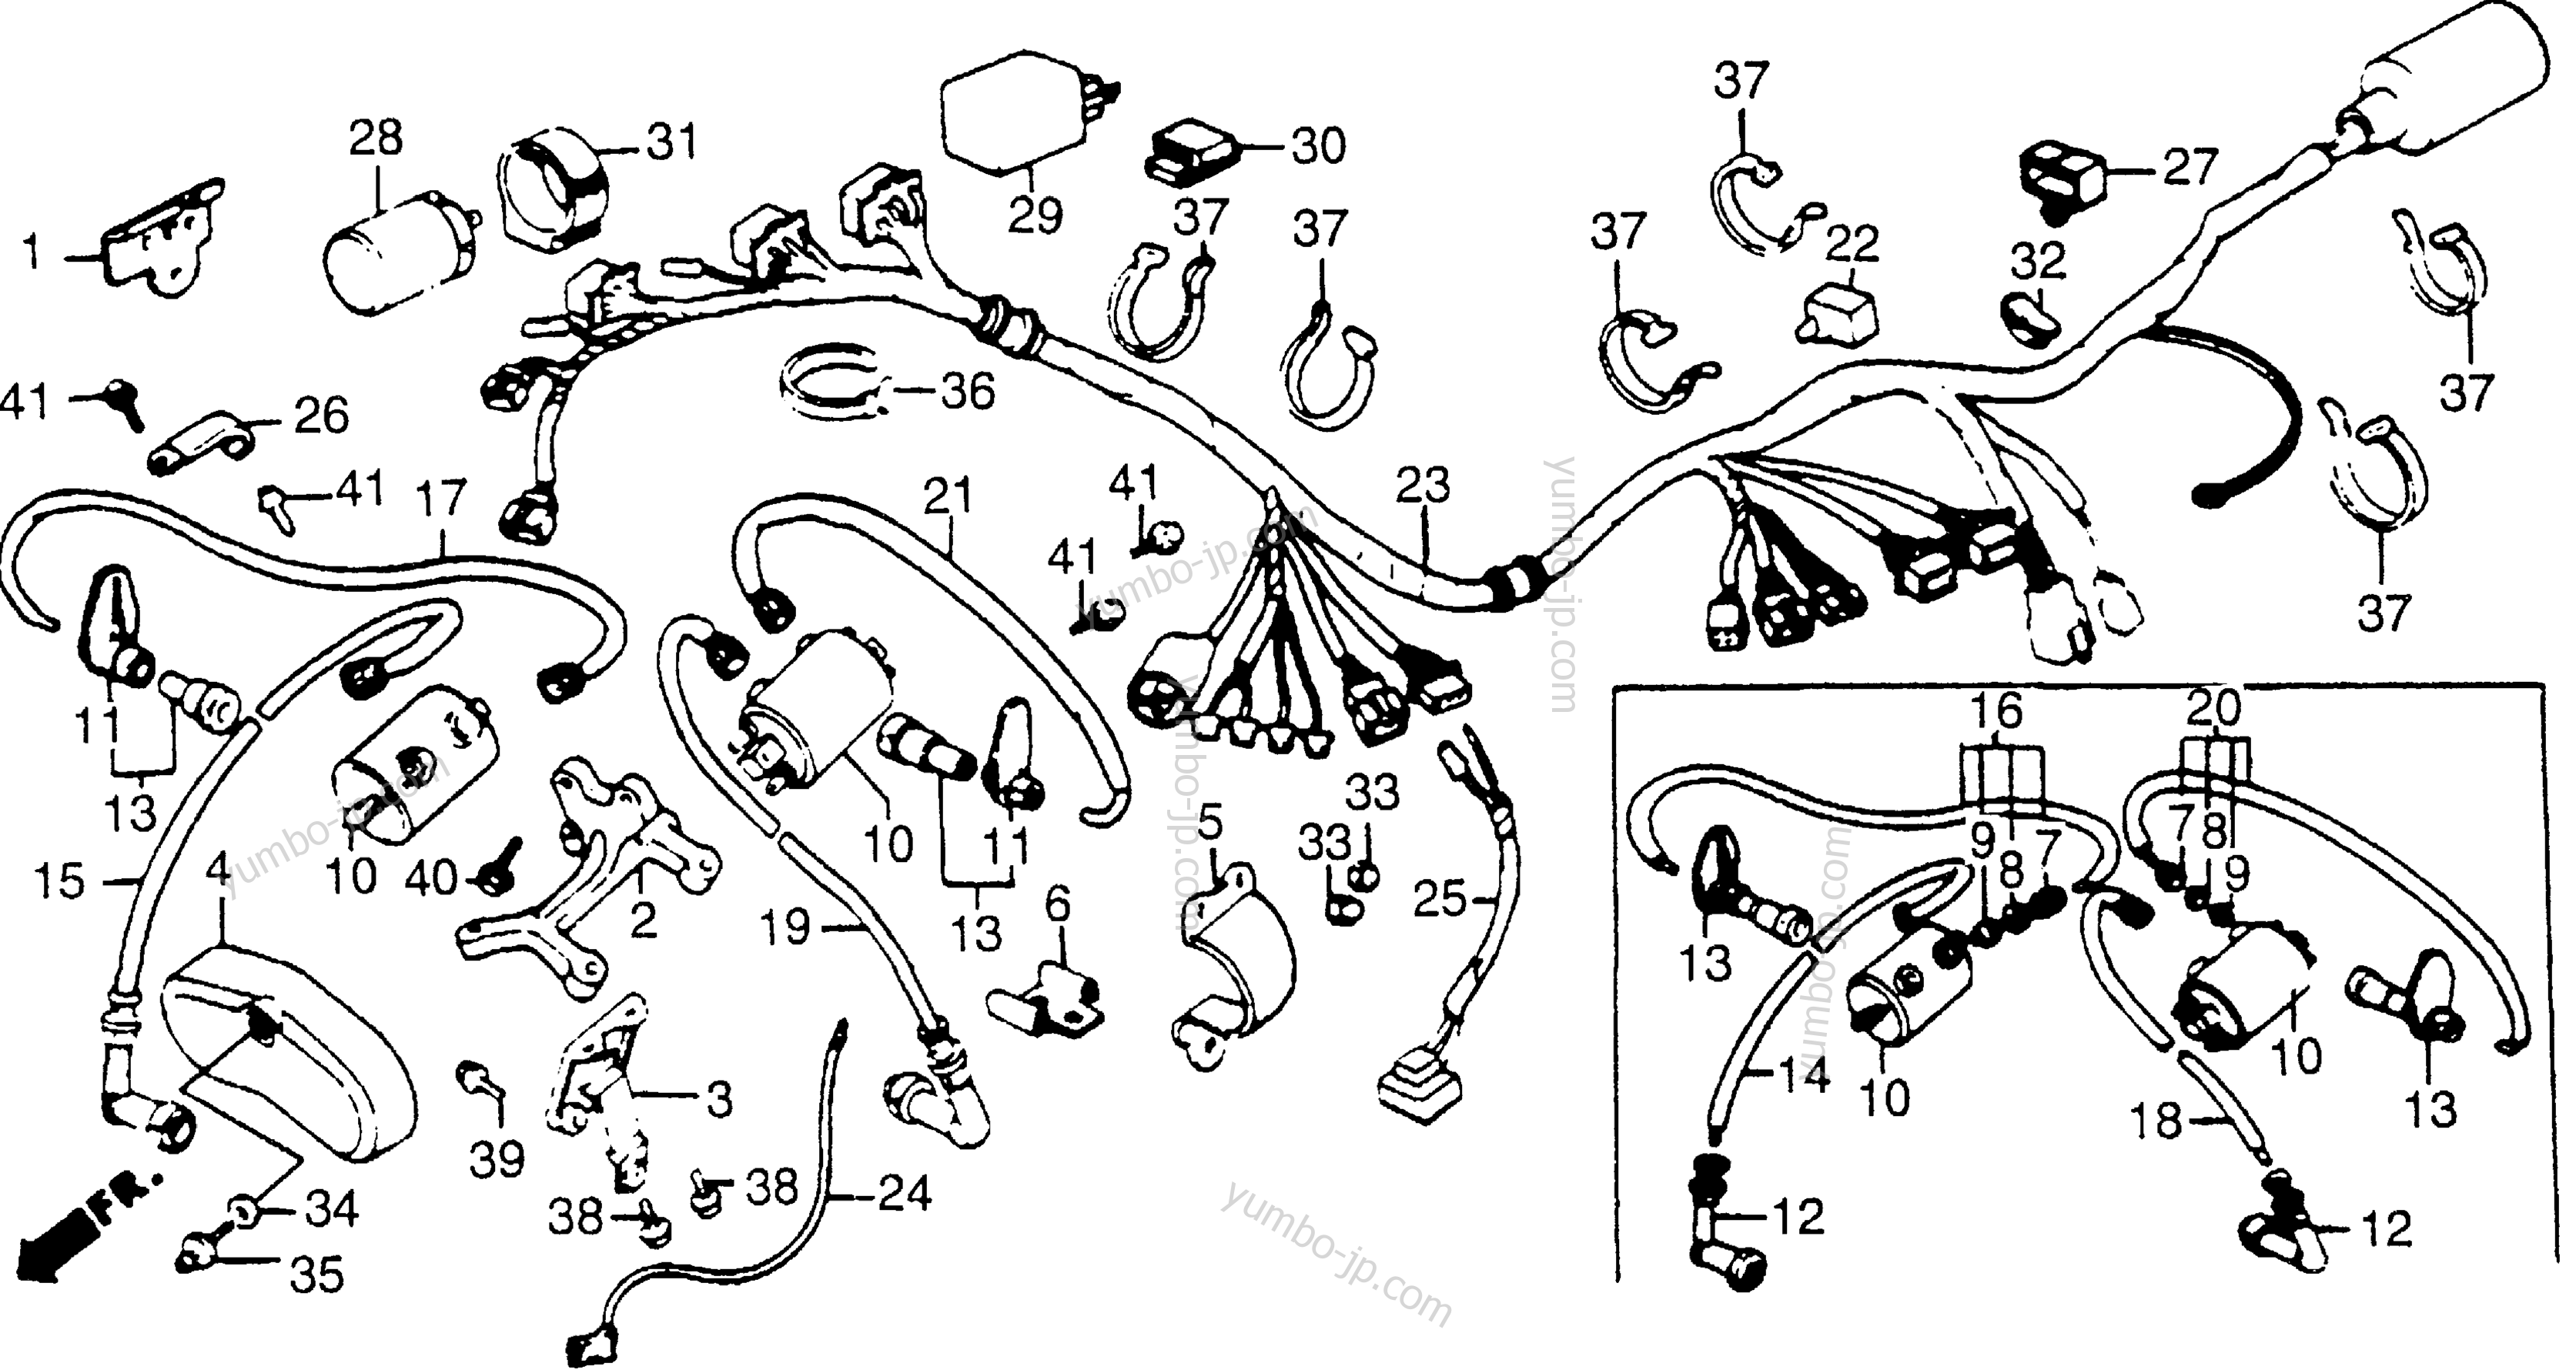 WIRE HARNESS for motorcycles HONDA VT500C A 1983 year